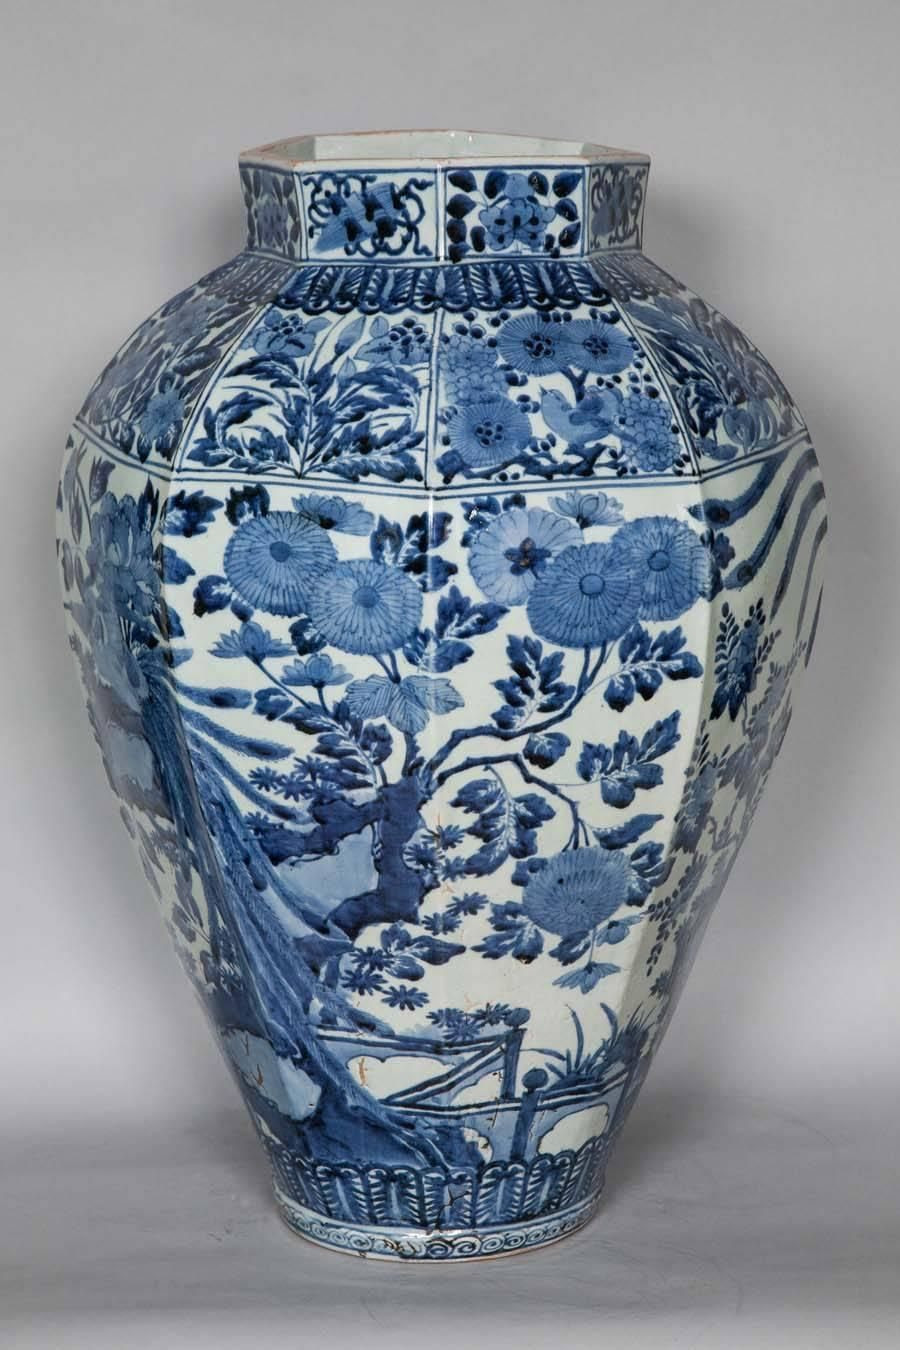 26 Unique Tall Blue White Vase 2024 free download tall blue white vase of tall japanese arita blue and white vase circa 1700 raymond with regard to tall japanese arita blue and white vase circa 1700 raymond horneman